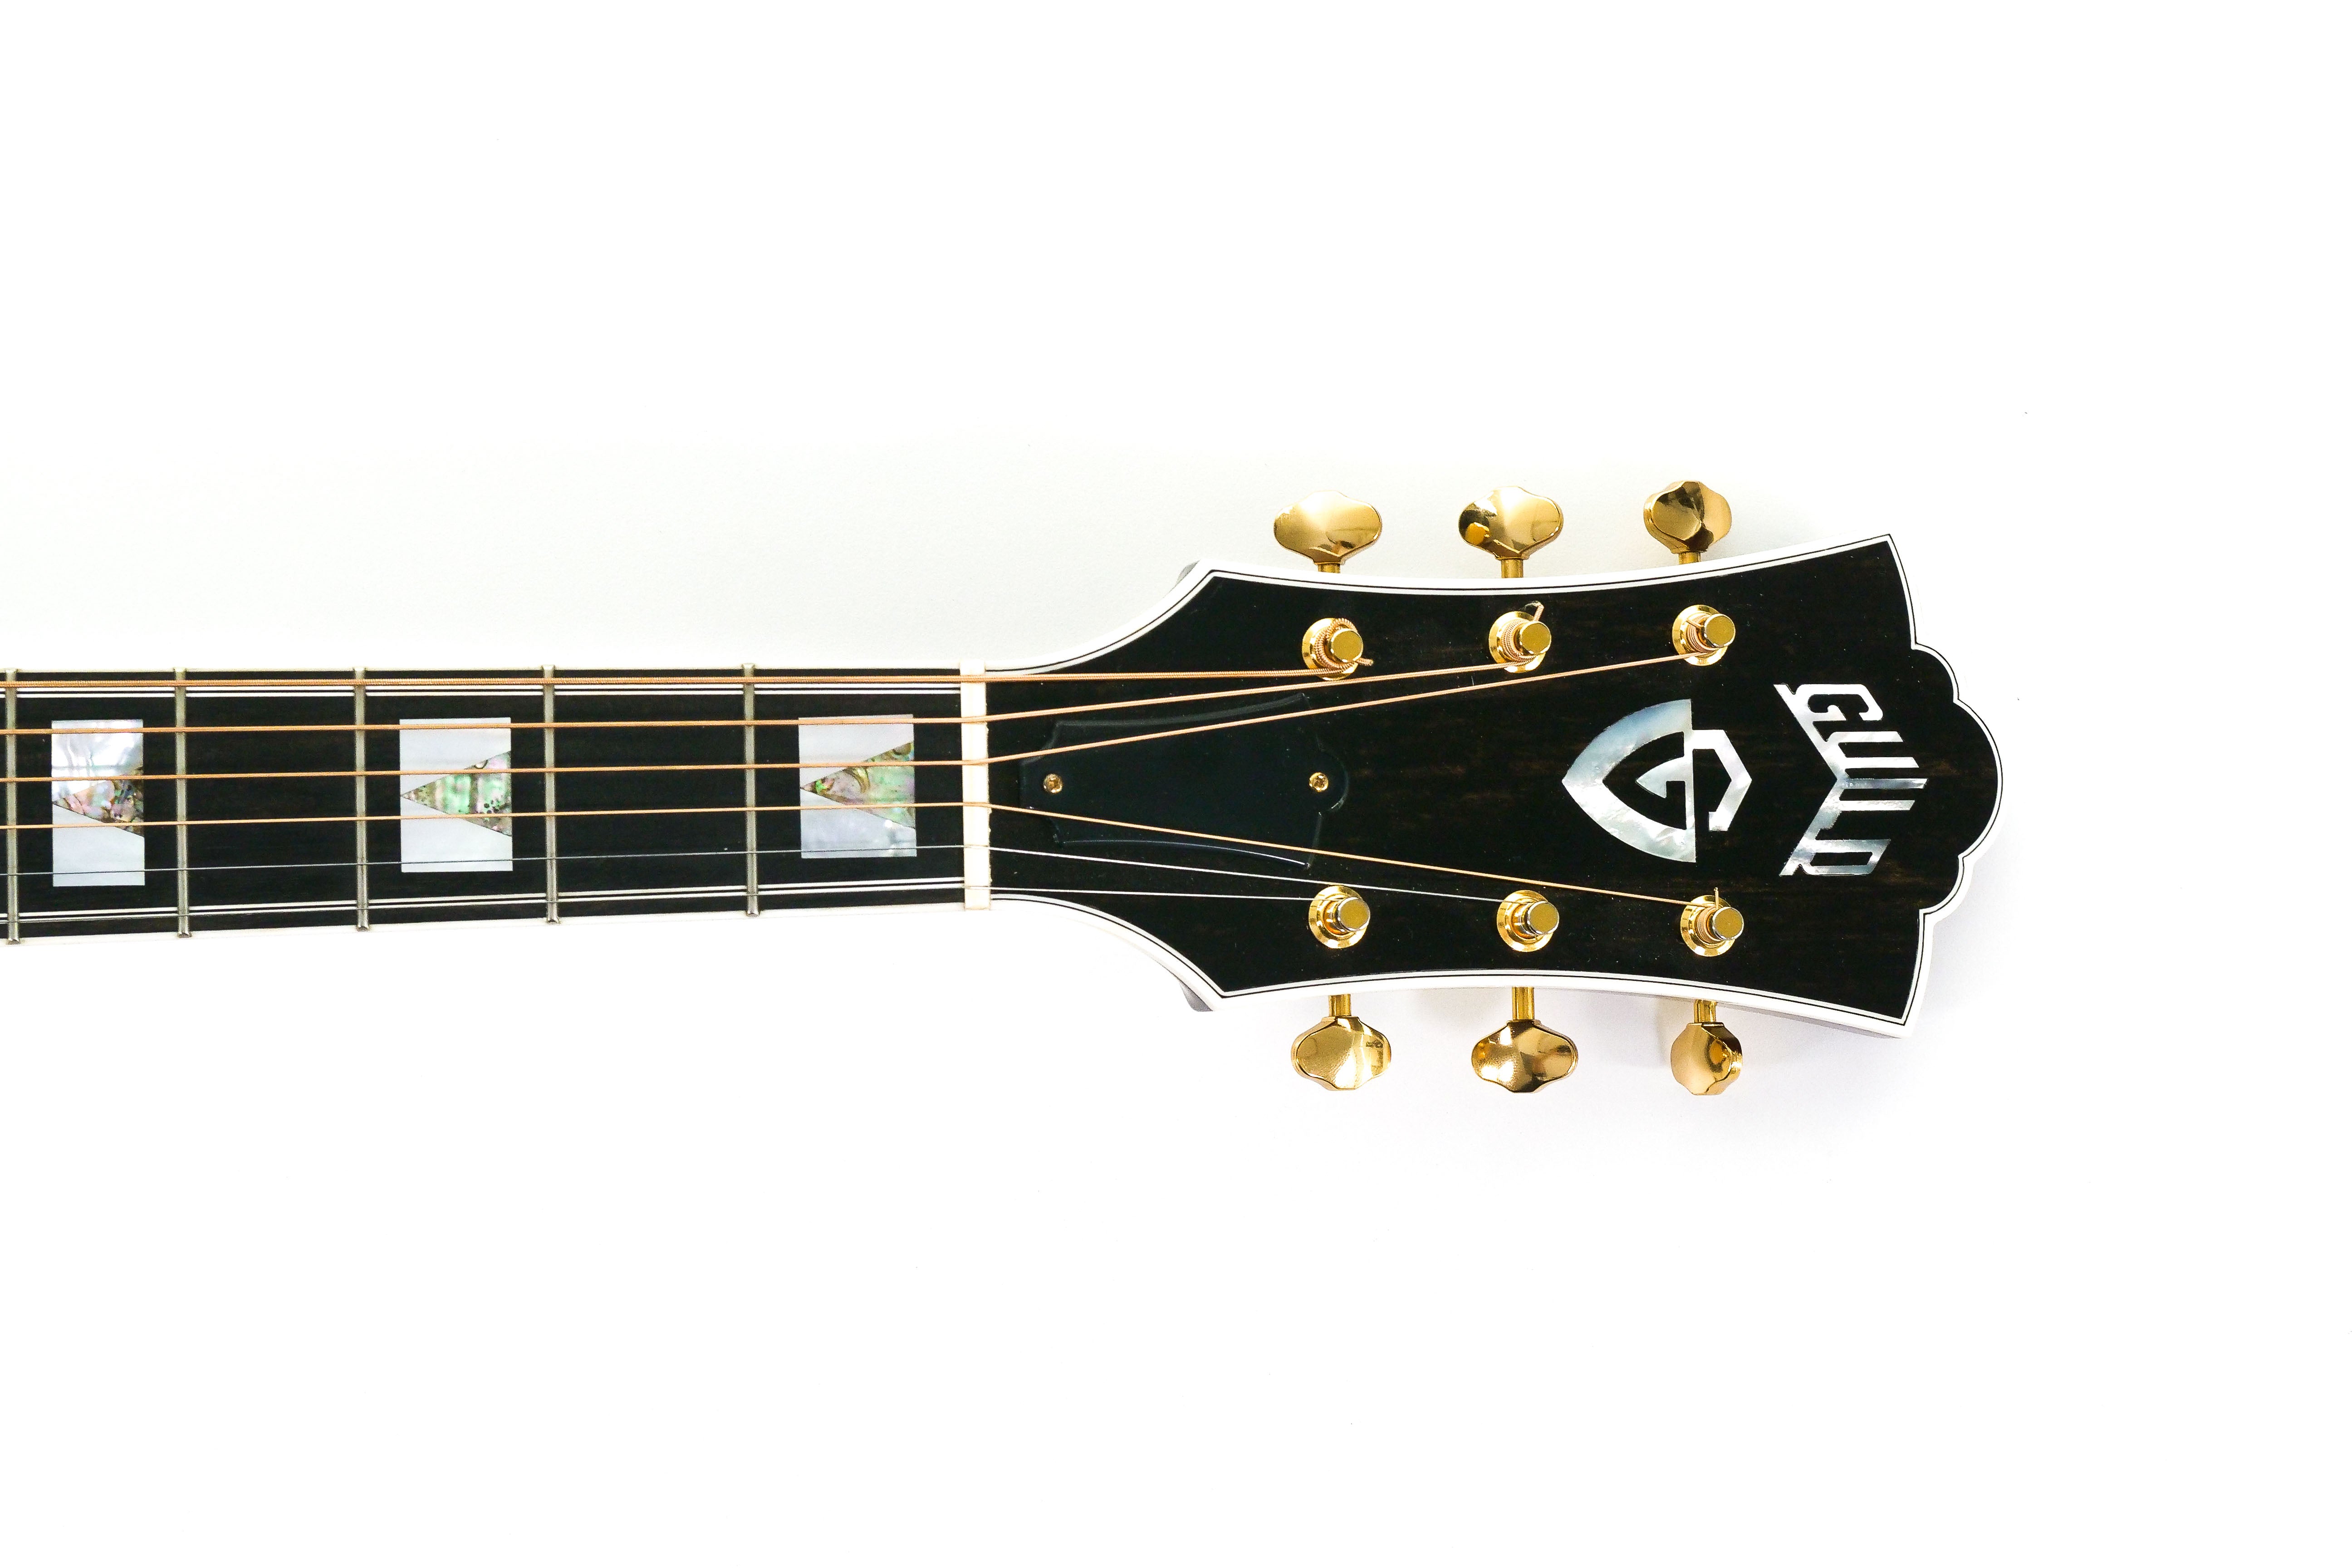 logo on front of headstock